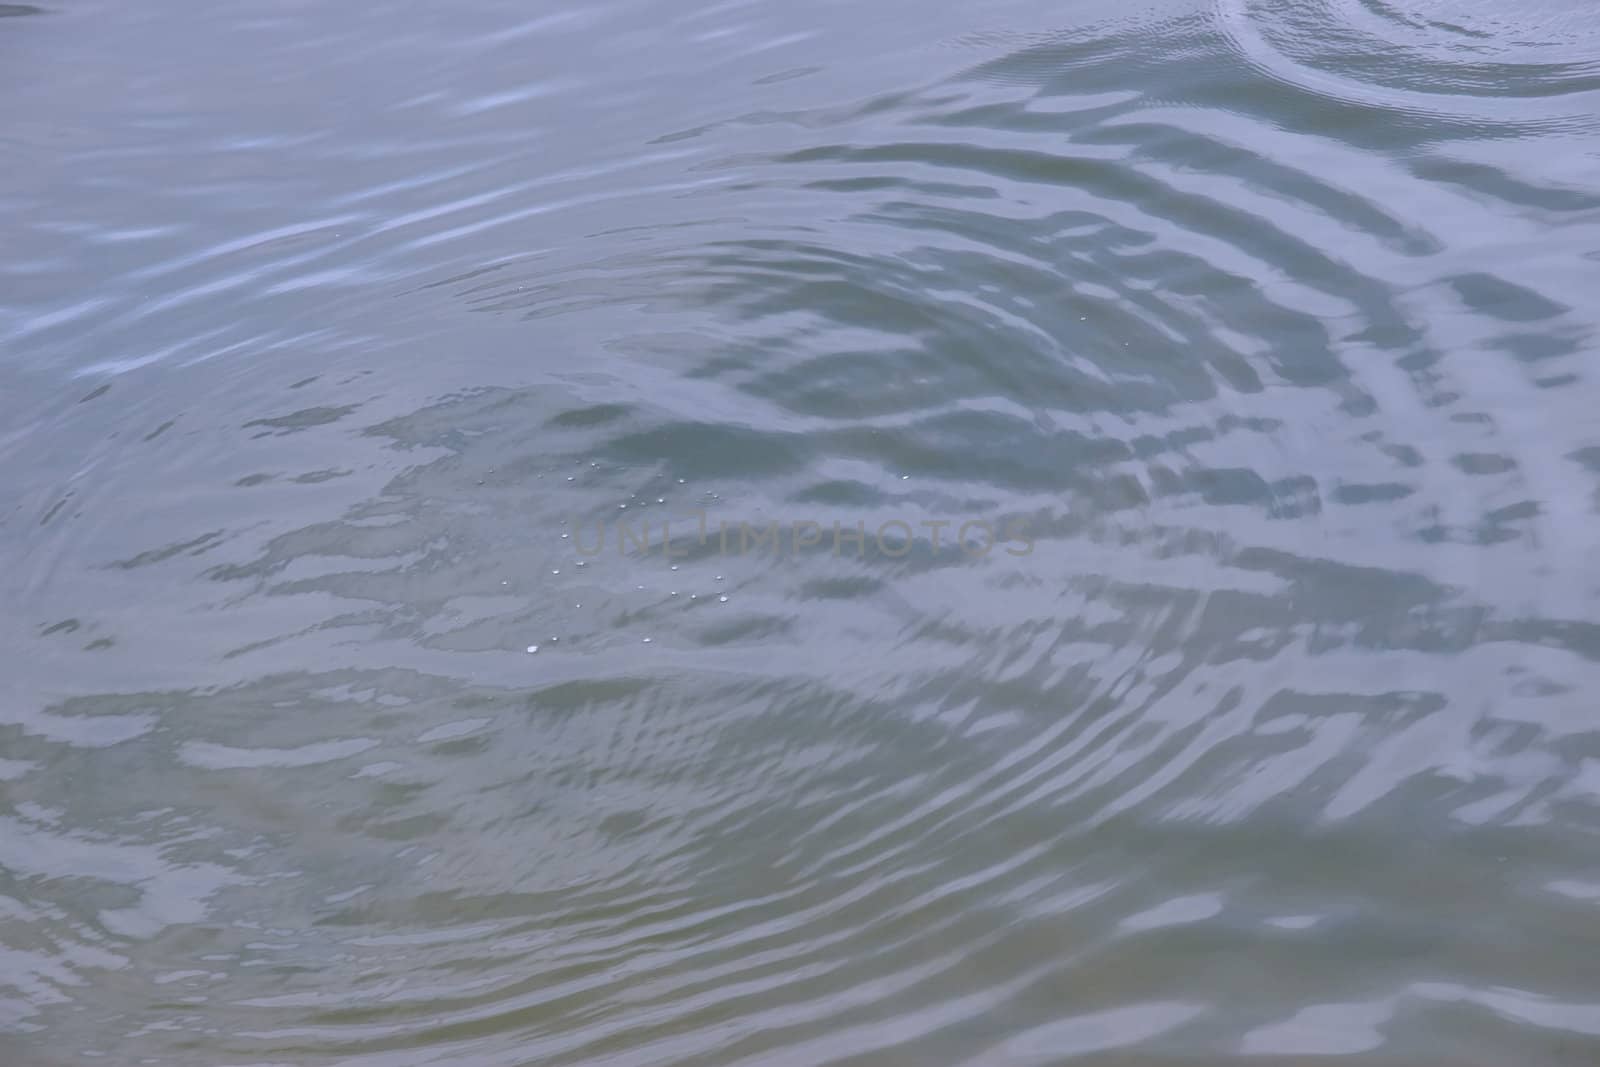 an image of water ripples from the ocean